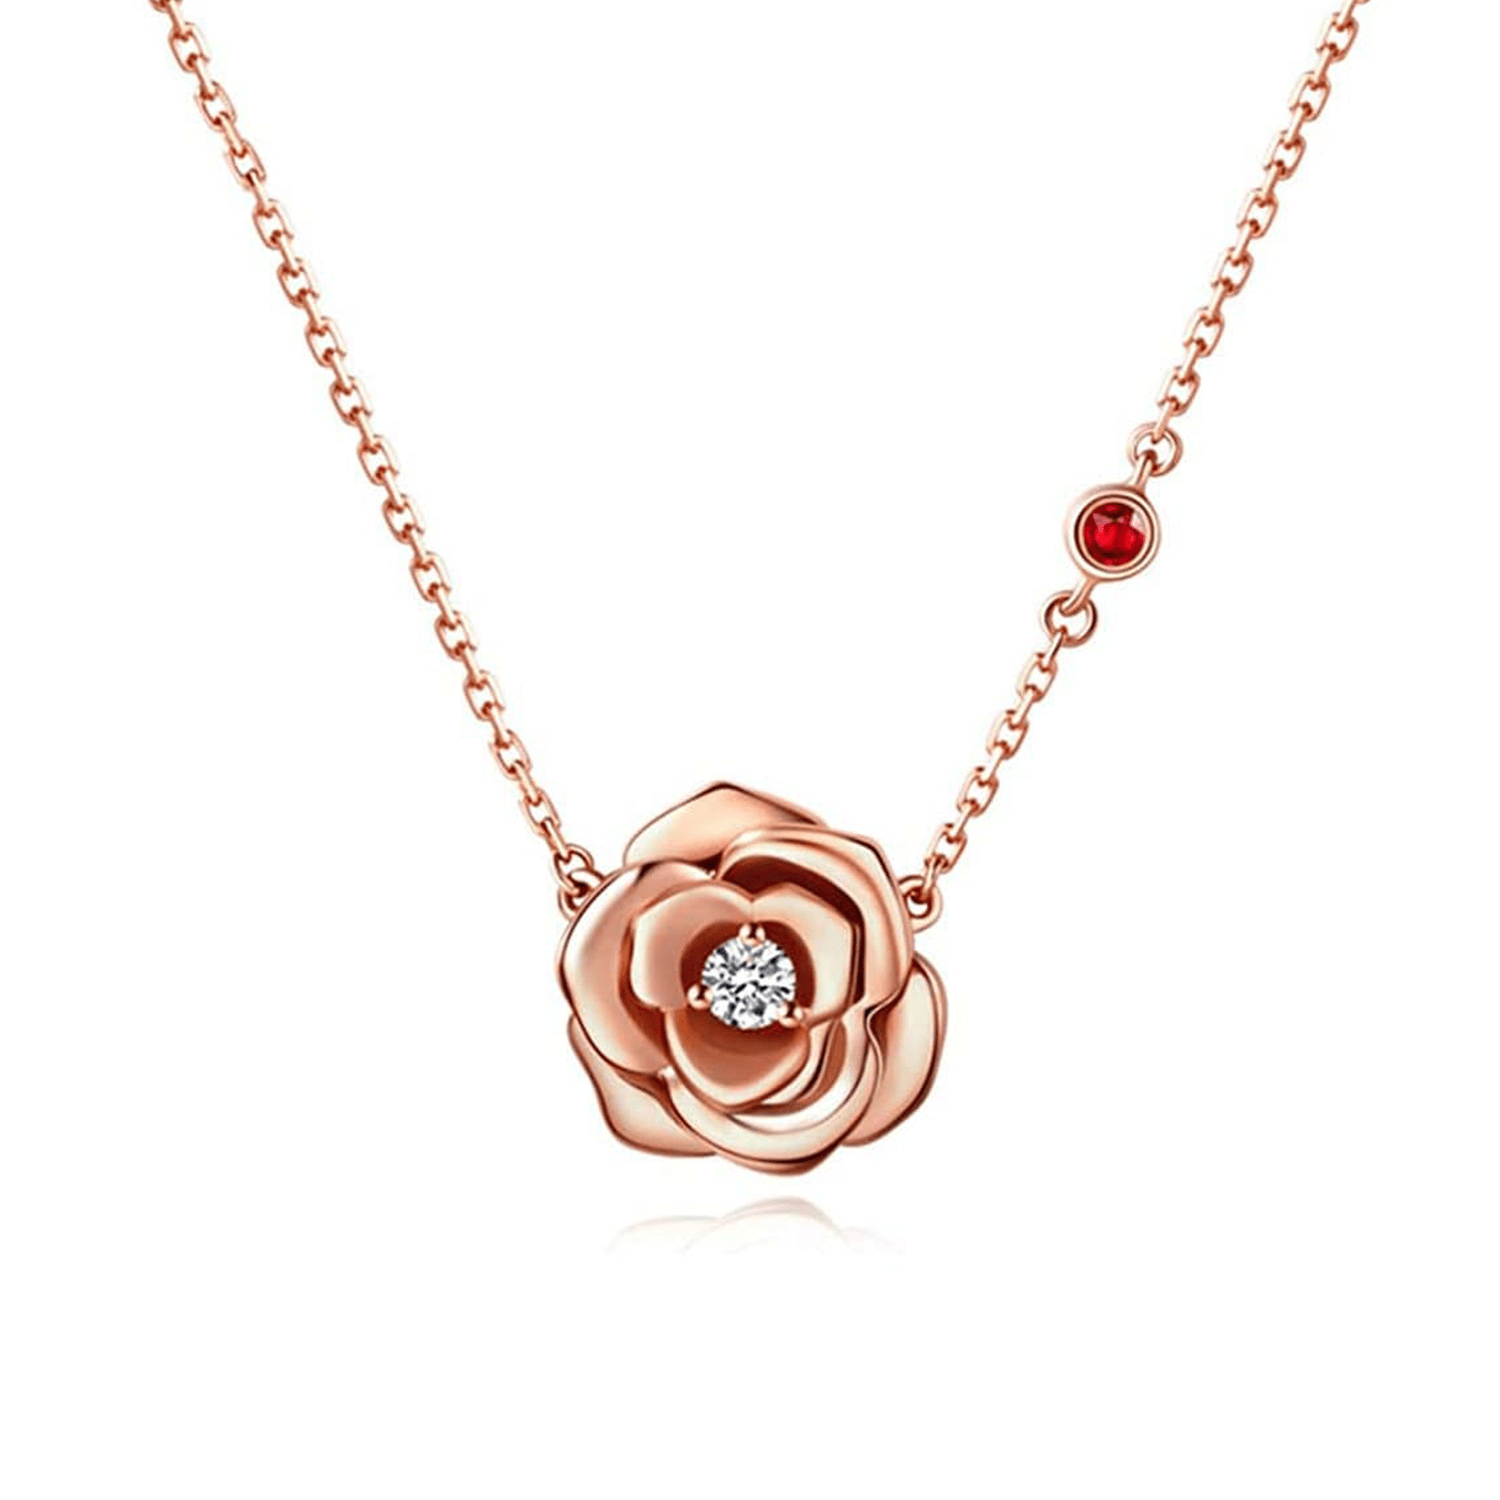 FANCIME "My Rose" 14k Solid Rose Gold Necklace Main